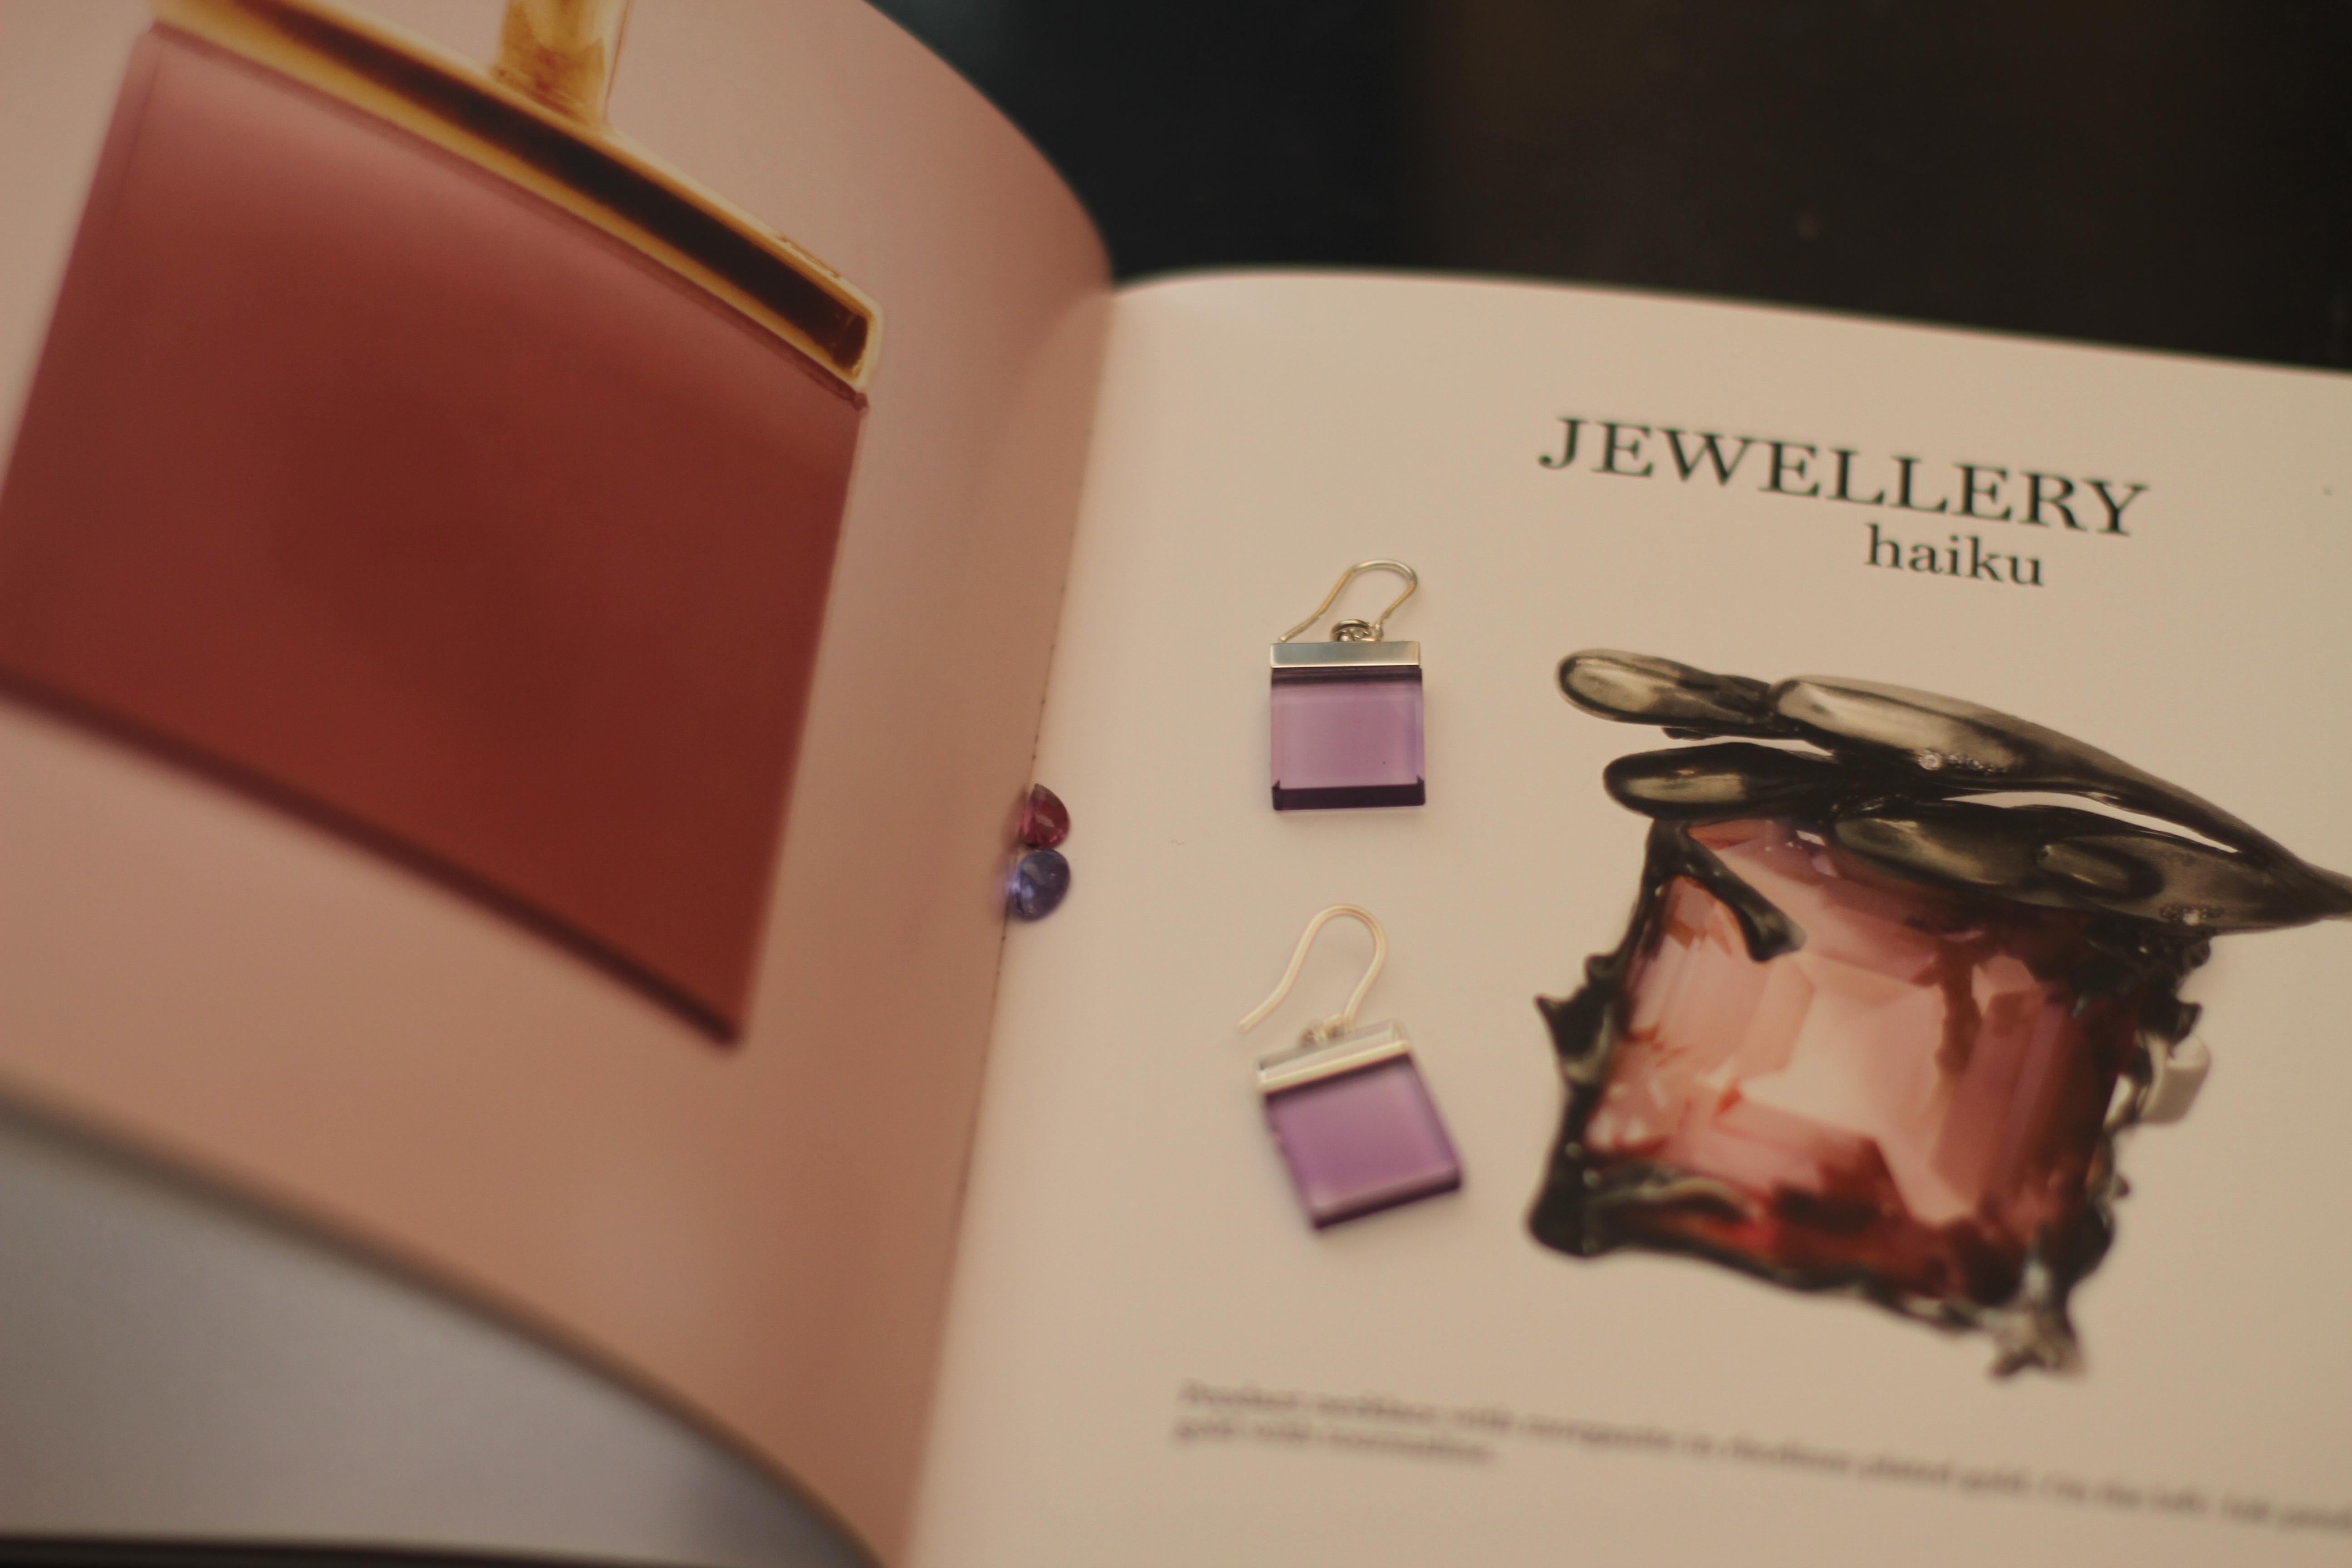 The earrings are made of 14 karat rose gold and feature 15x15x3 mm natural light pinkish amethysts that are both attractive and elegant.

This contemporary jewellery collection was originally designed by artist Polya Medvedeva as sculptures made of